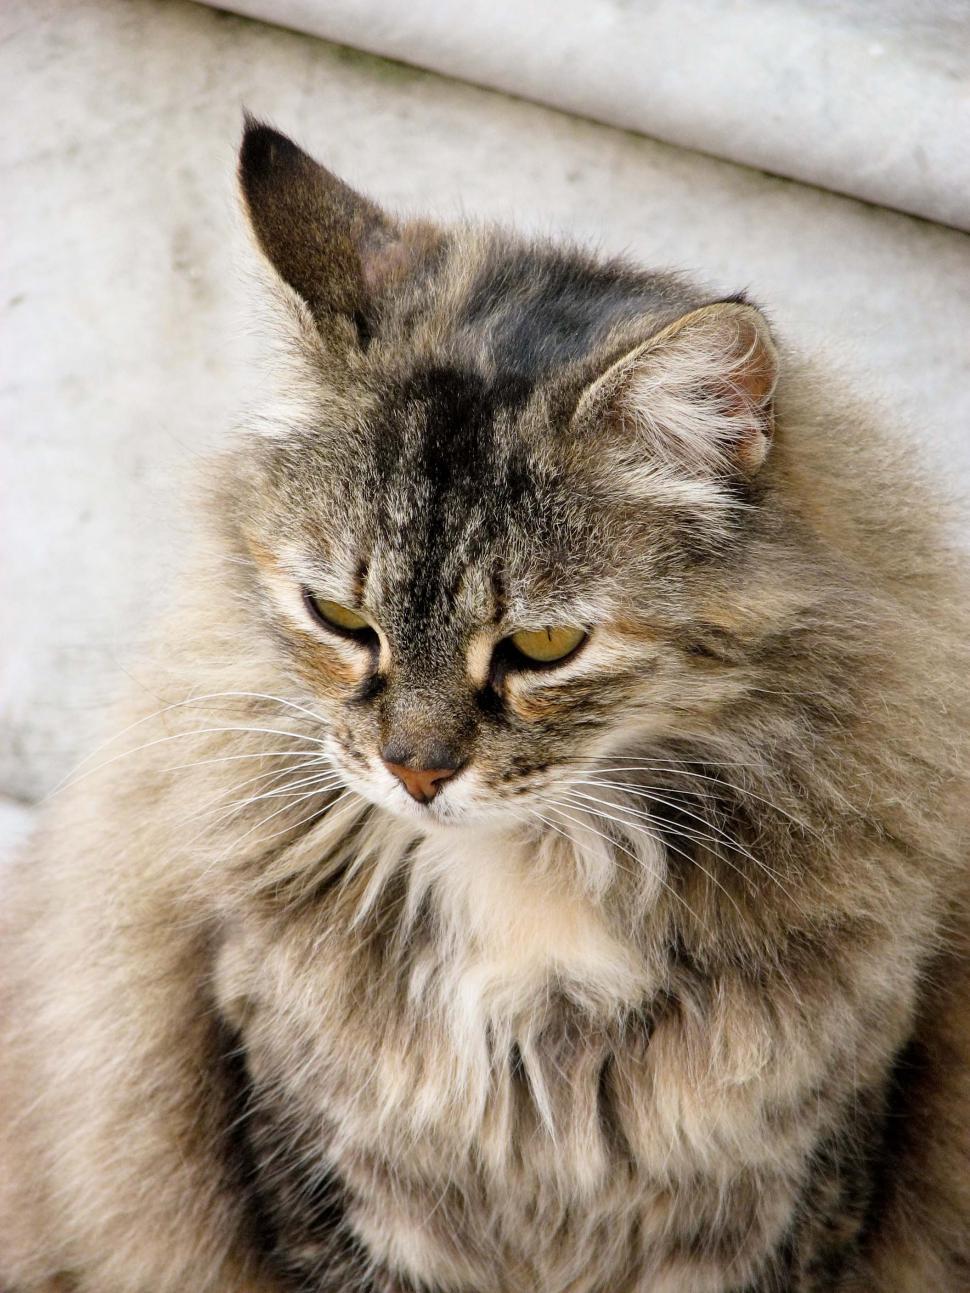 Free Image of Fluffy Cat Sitting Next to Wall 